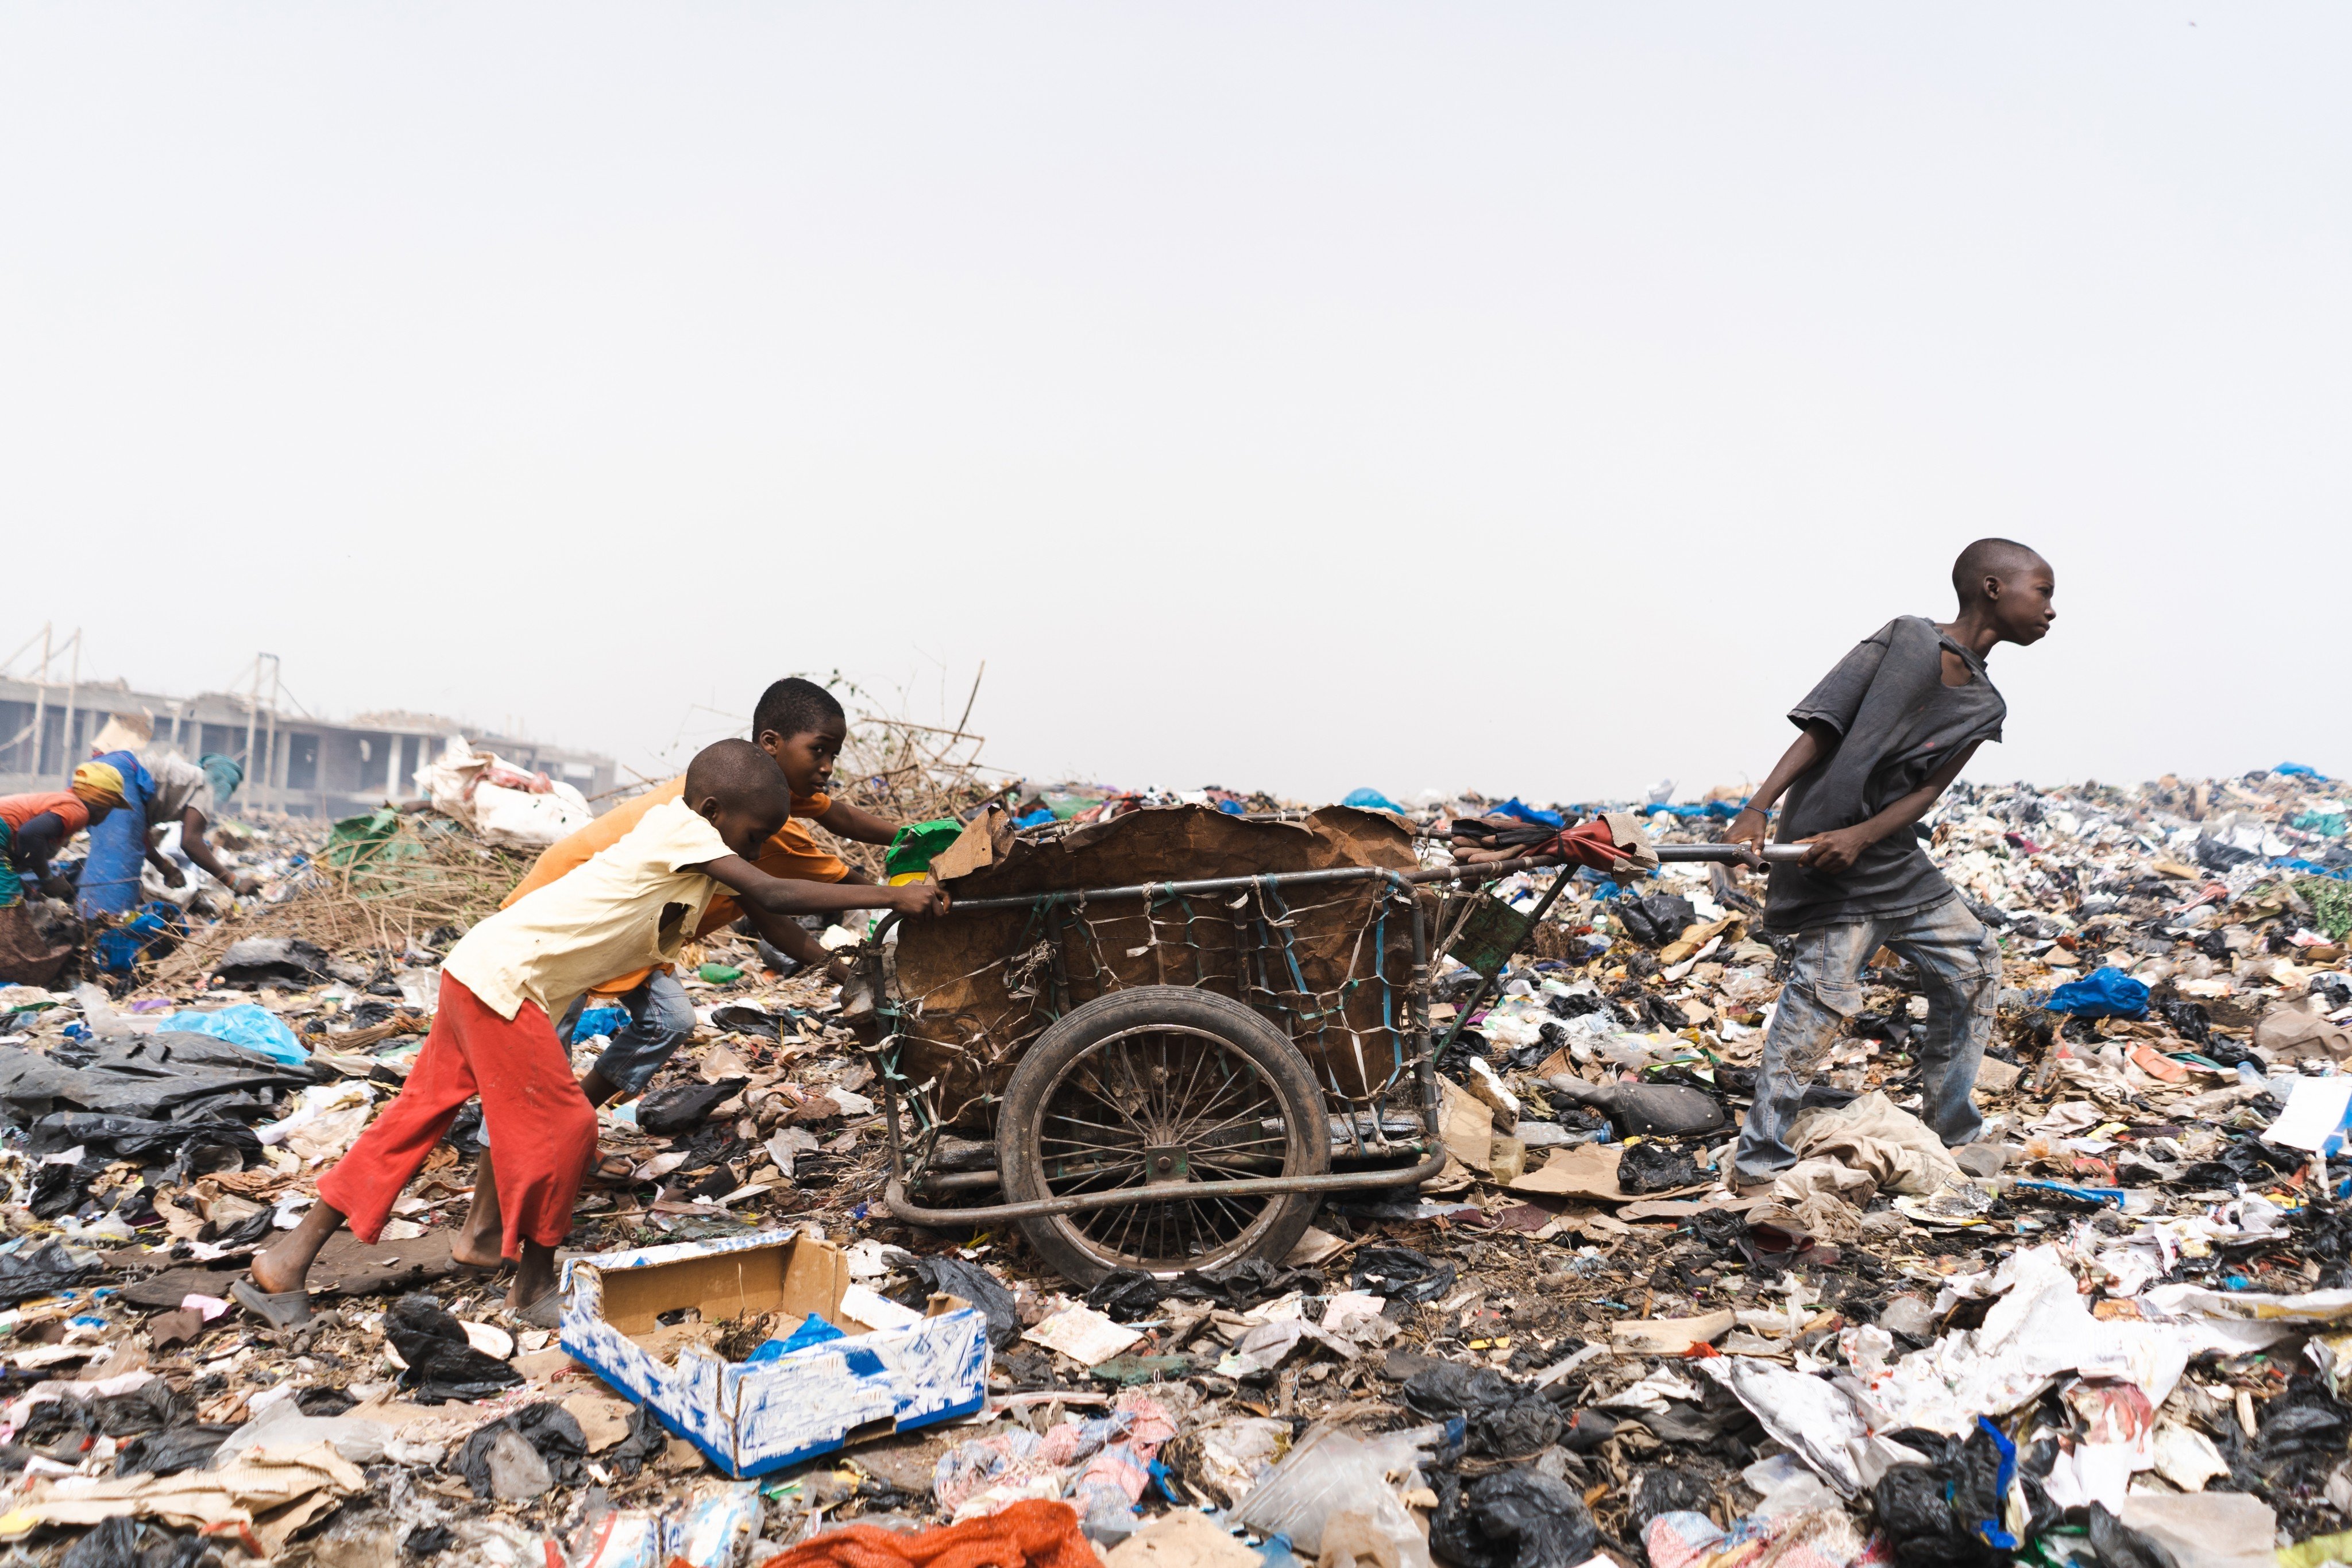 Customers are purchasing far more fast fashion and discarding far more – and Africa is paying the price. Photo: Shutterstock